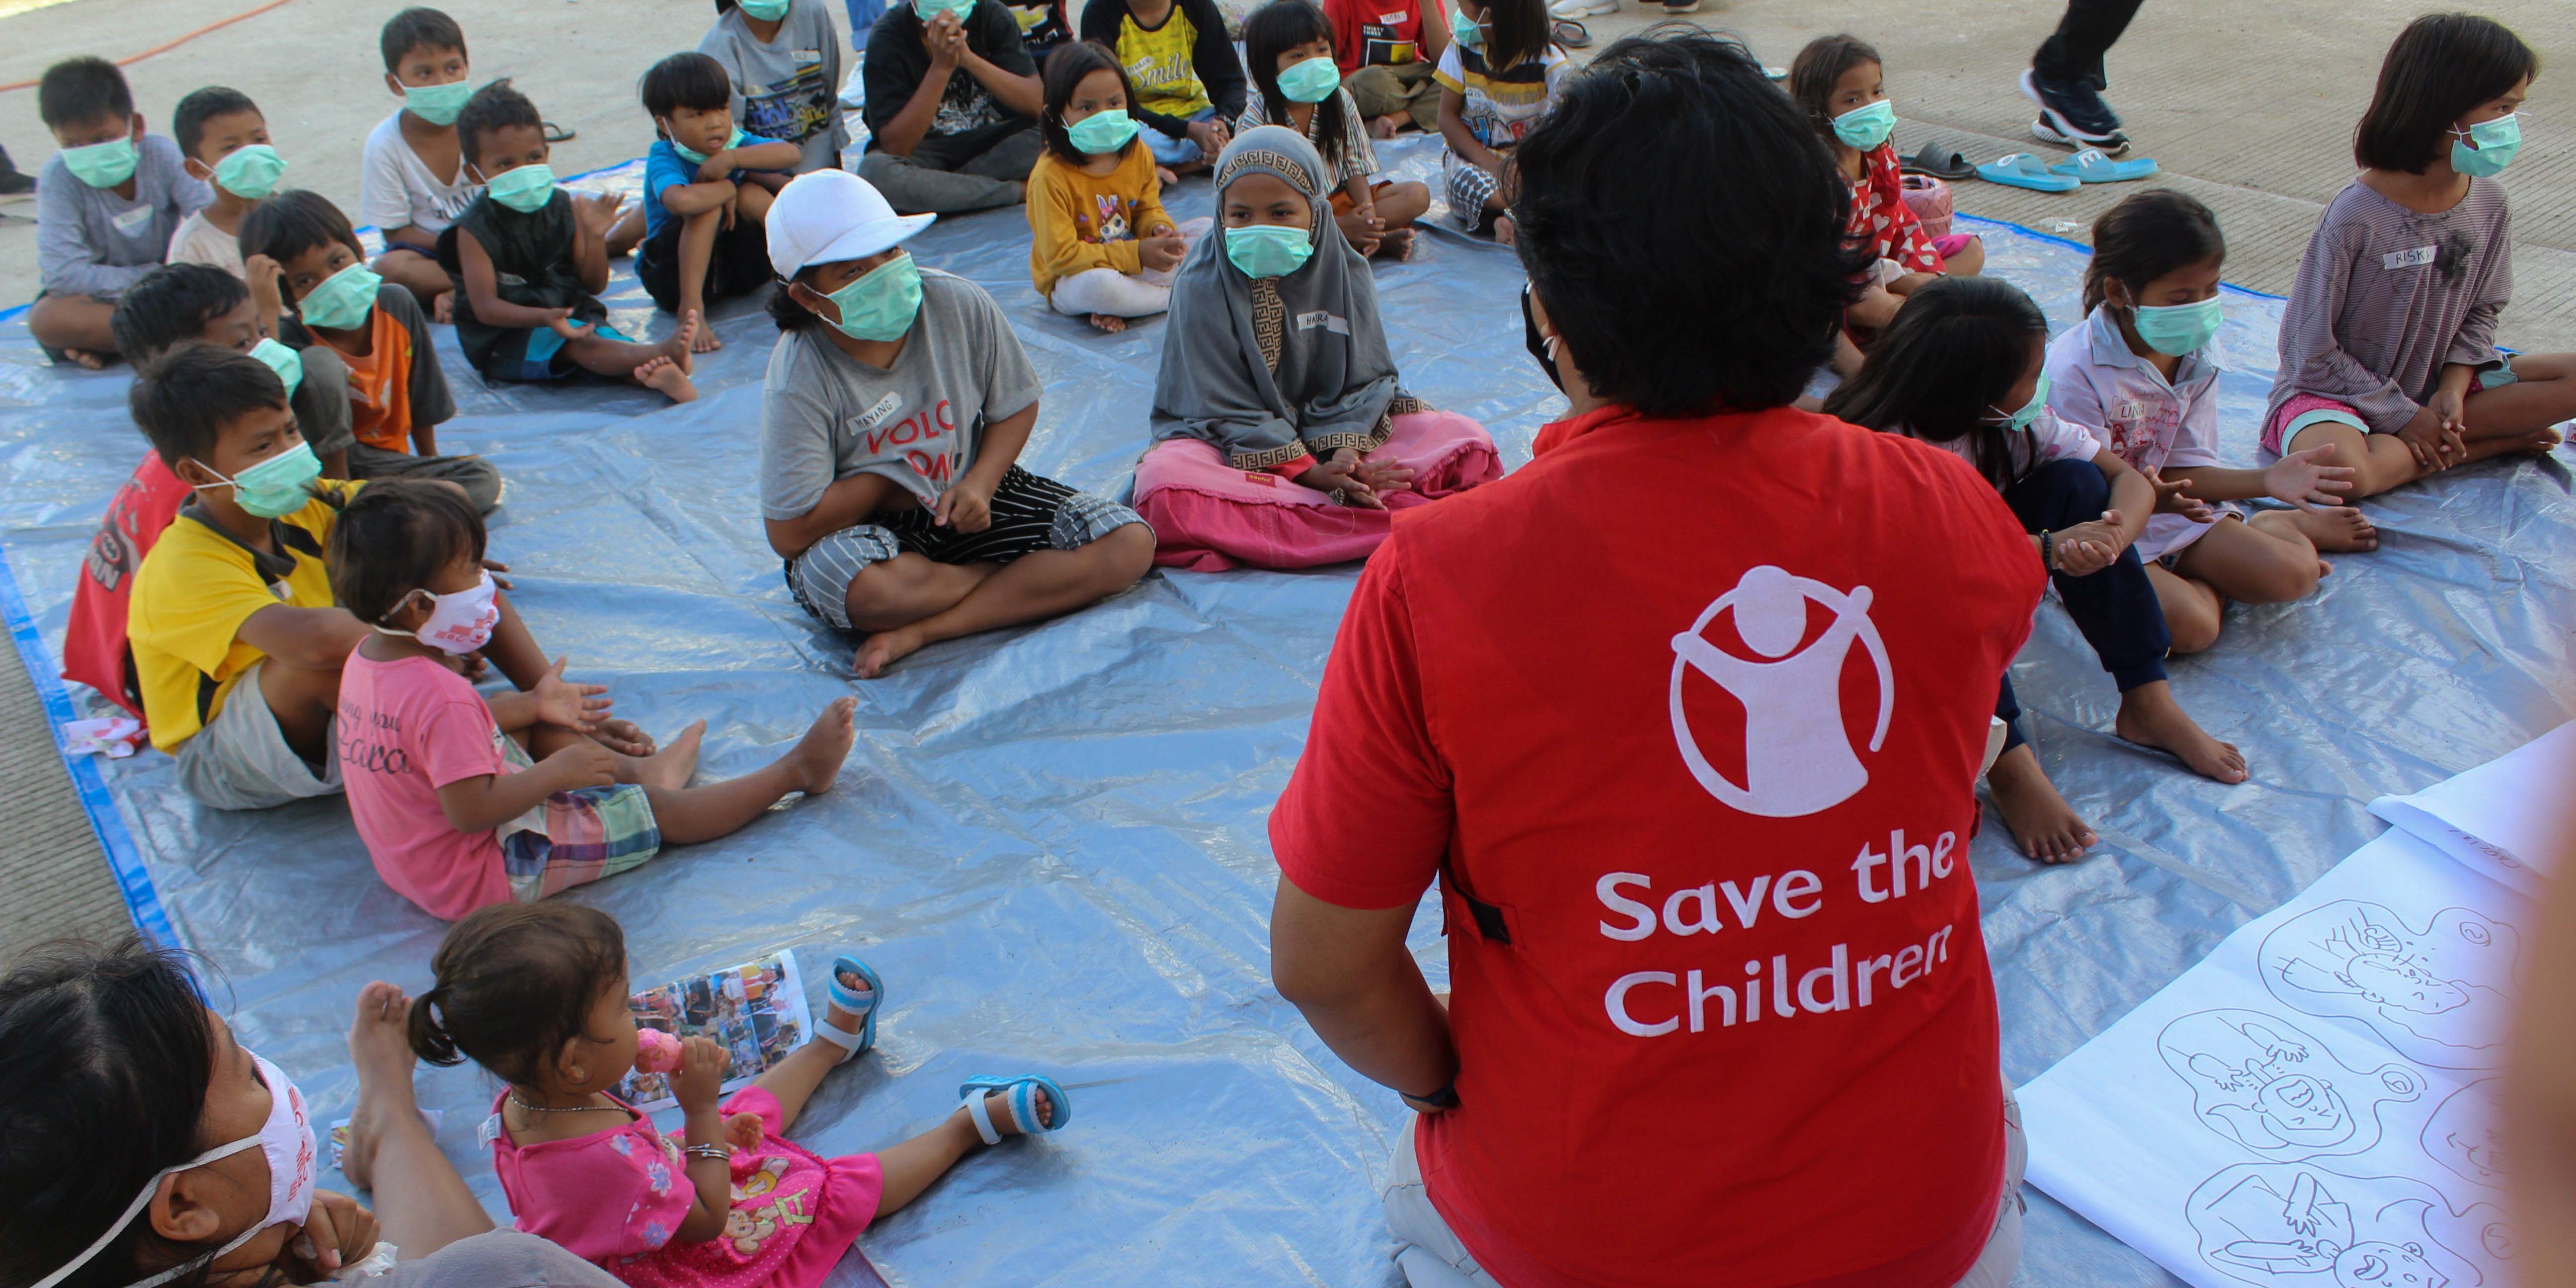 The response team of Save the Children educates children survivors in Mamuju about the dangers of Covid-19 and the importance of washing hands with soap, maintaining distance, and wearing masks.